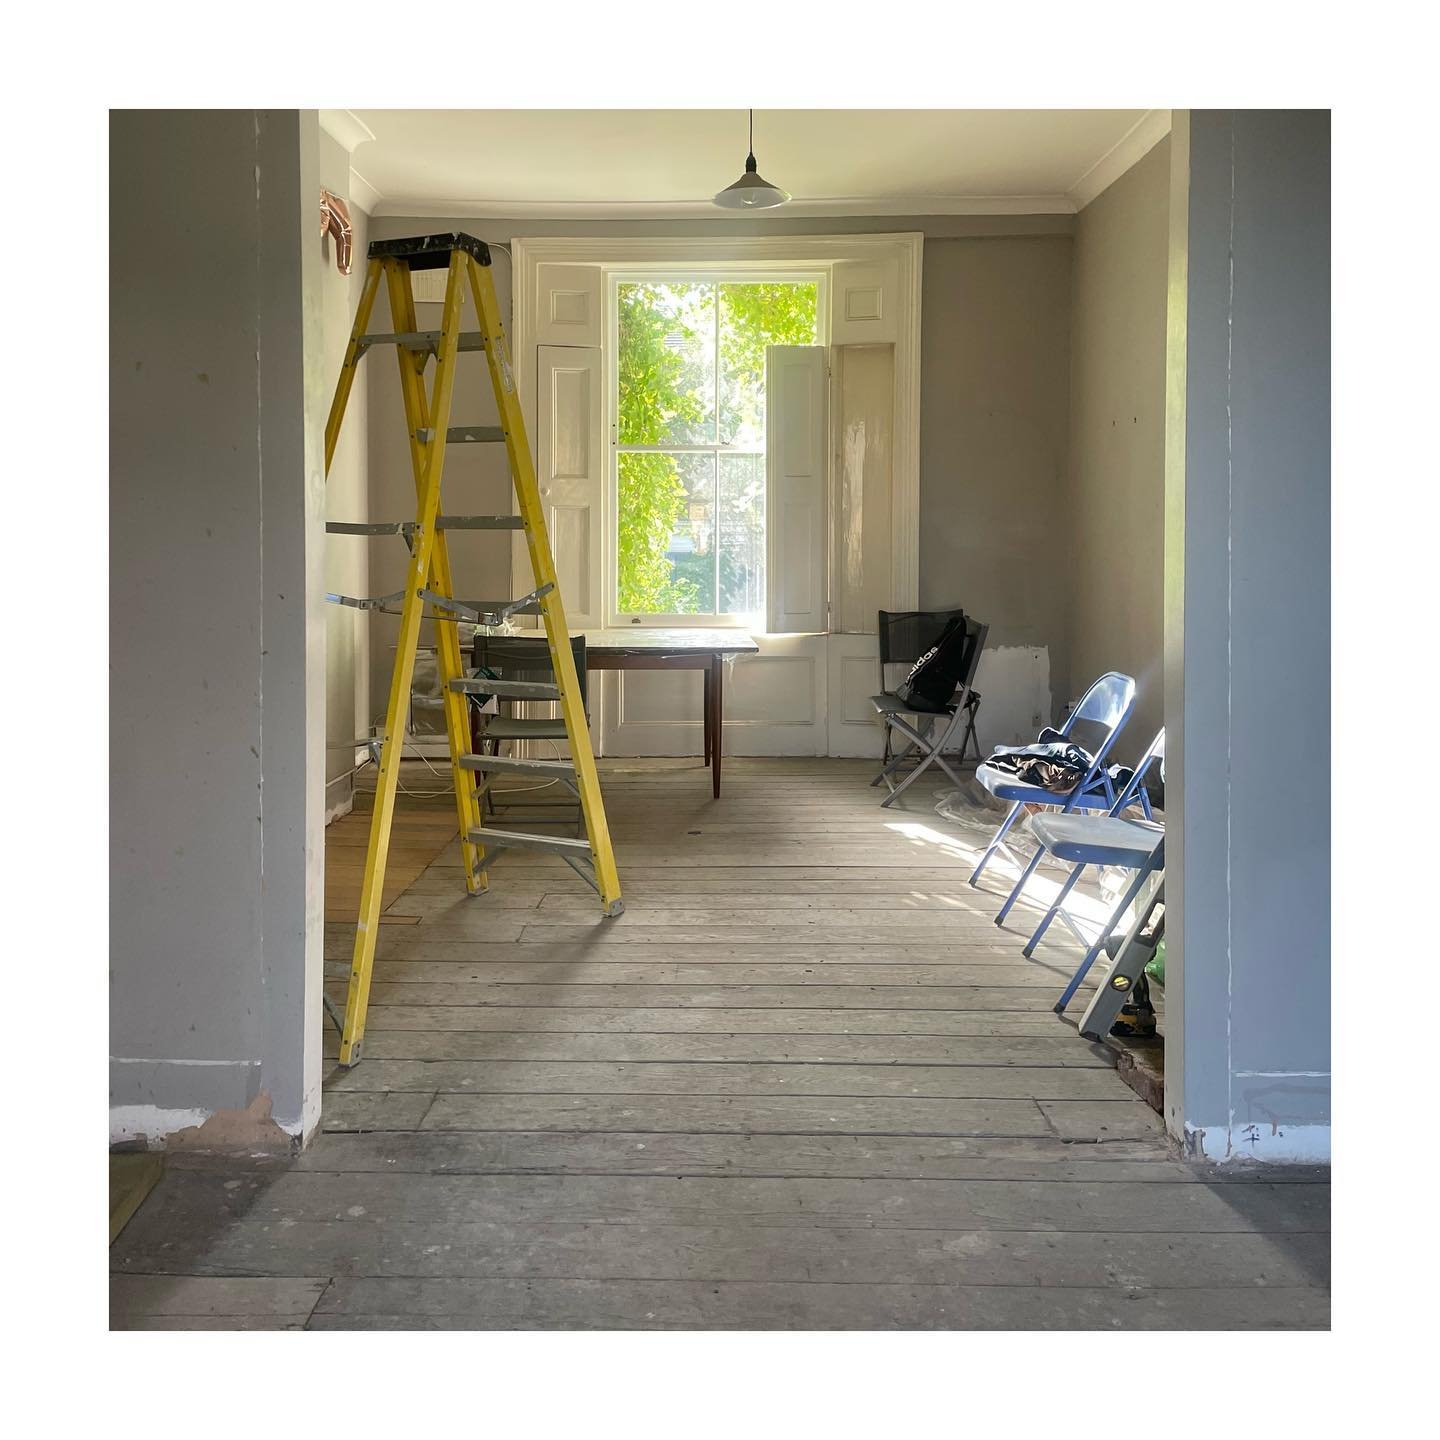 This project is on site at last ✨it&rsquo;s been a test of patience to get here ( beware leasehold properties! ) - So it&rsquo;s particularly exciting to be ditching some ropey finishes &amp; removing awkward chimneys, amongst other things&hellip; in